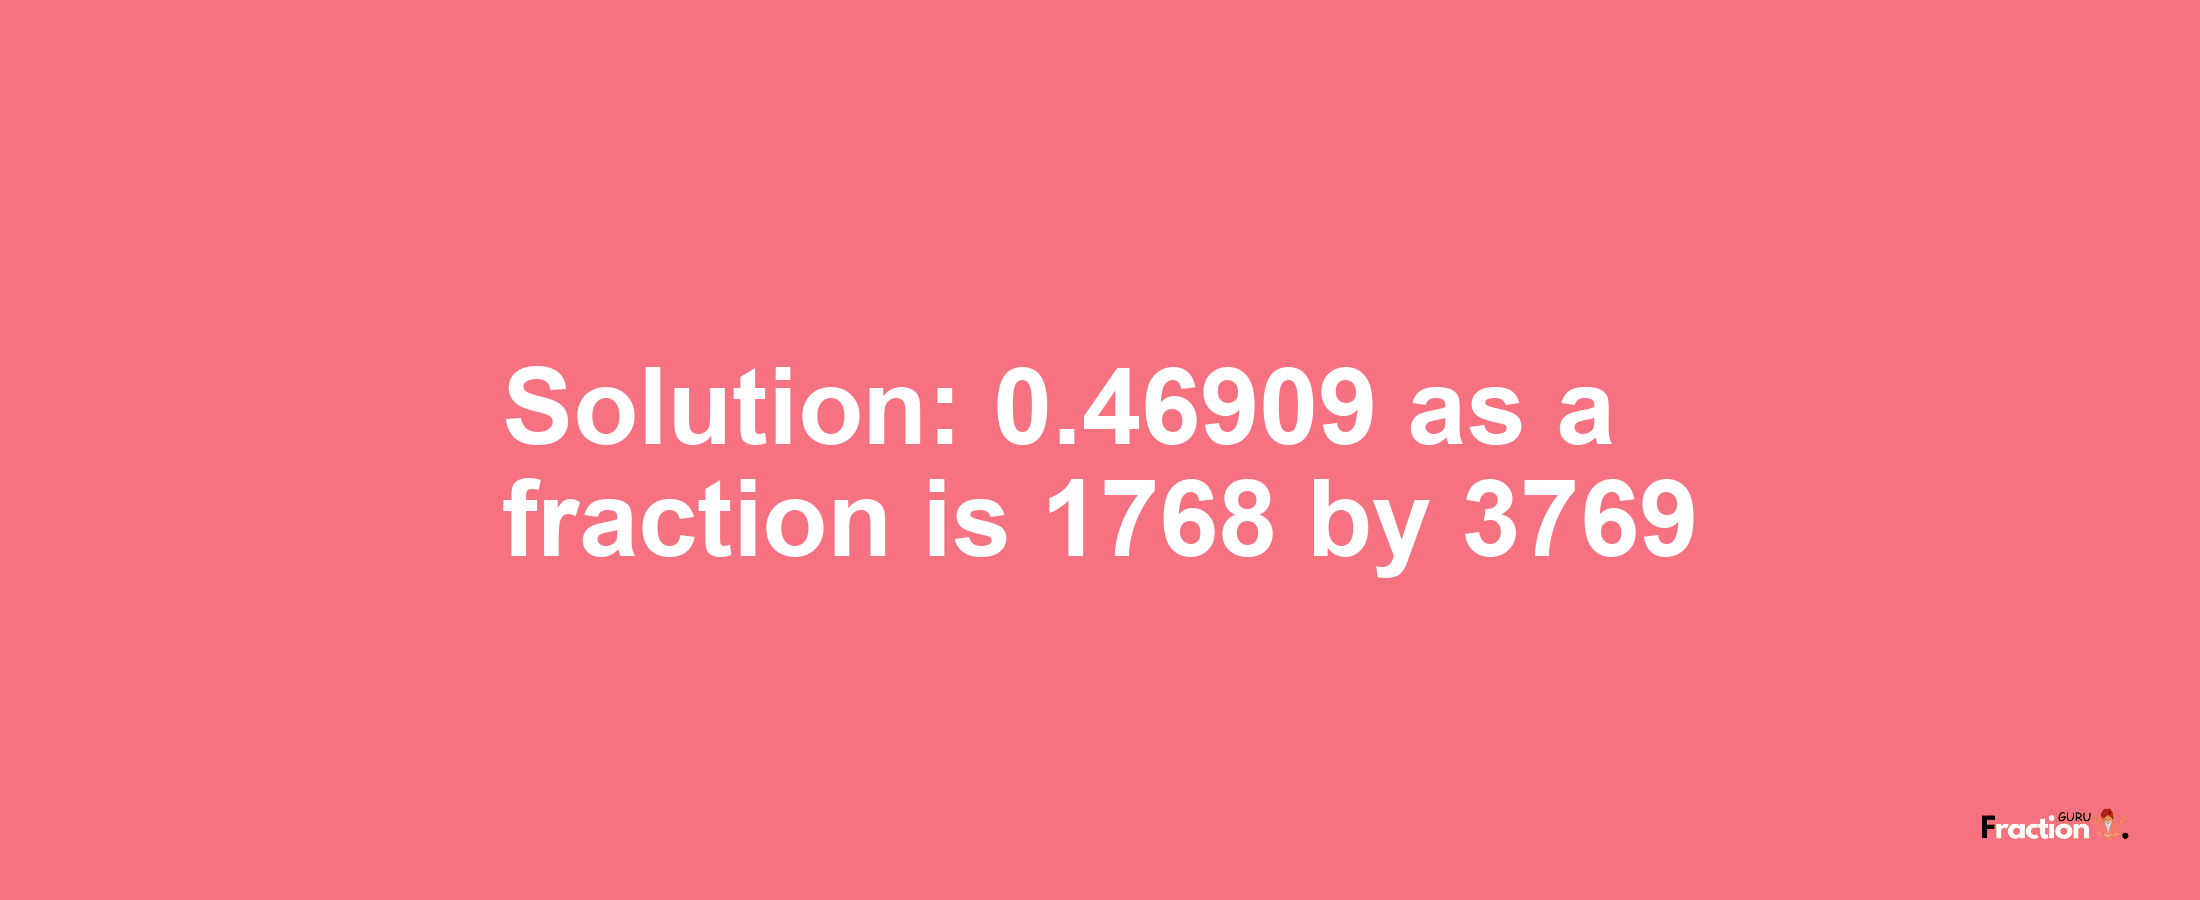 Solution:0.46909 as a fraction is 1768/3769